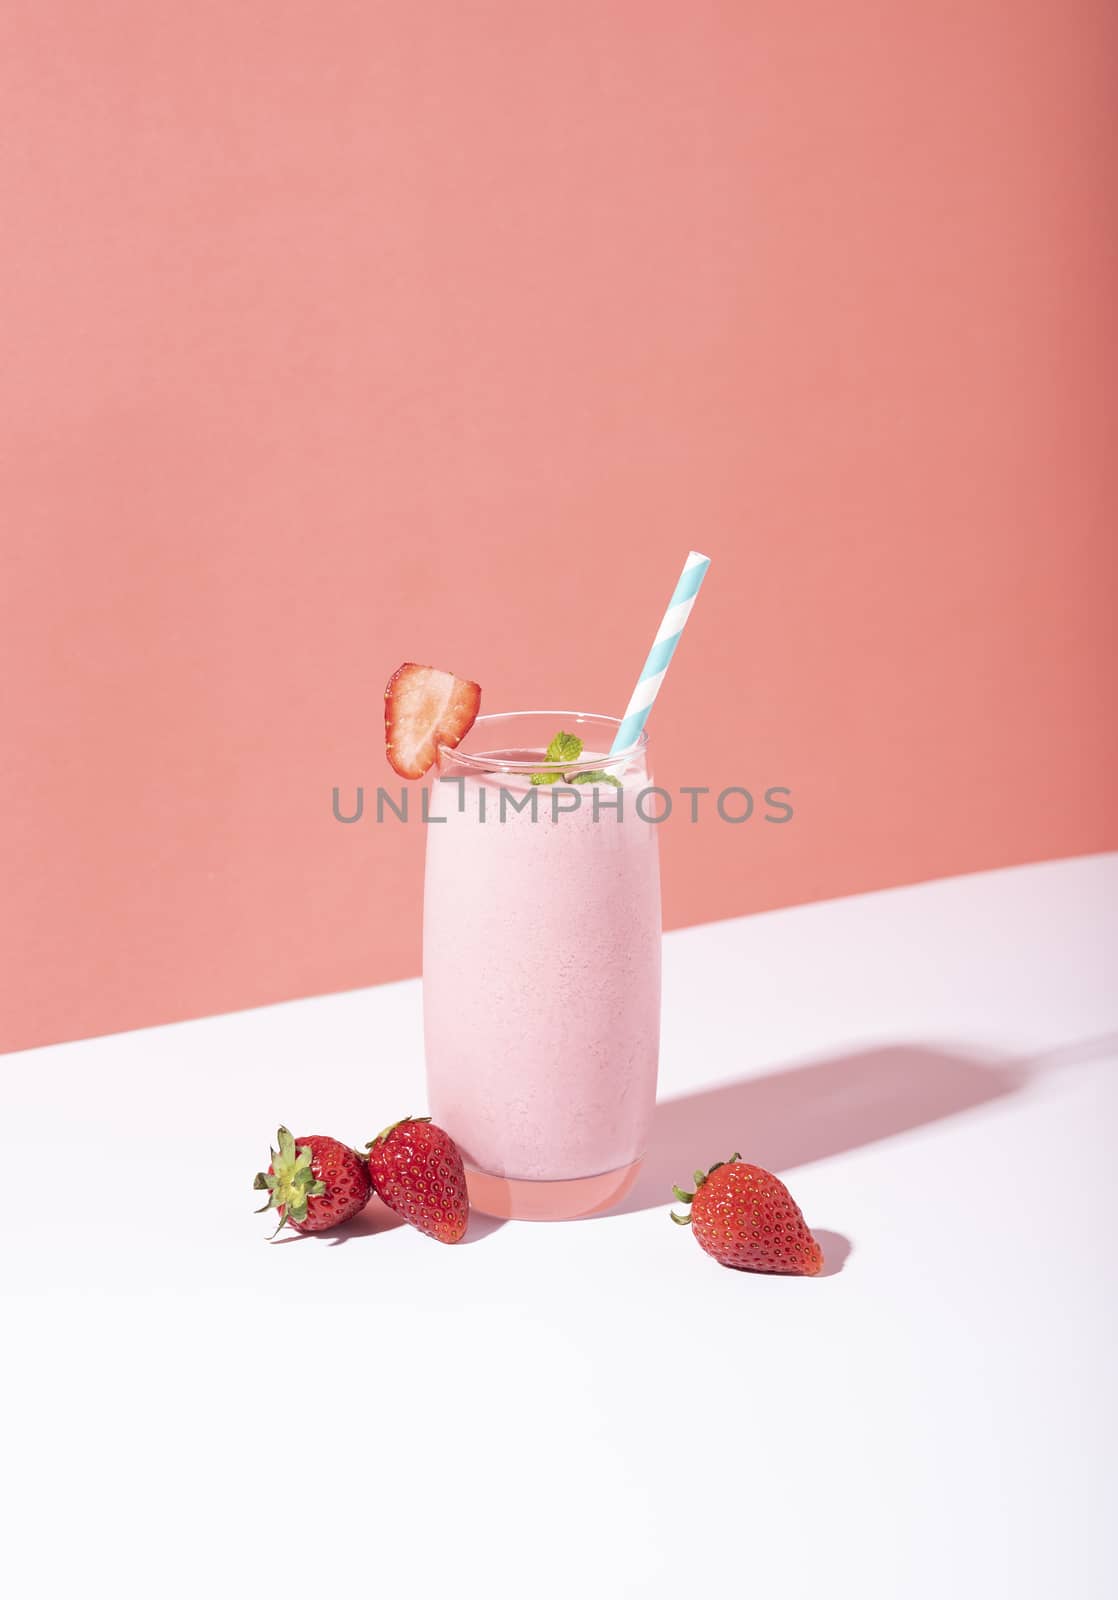 Strawberry smoothie in glass with straw and scattered berries on pink background. by barameeyay